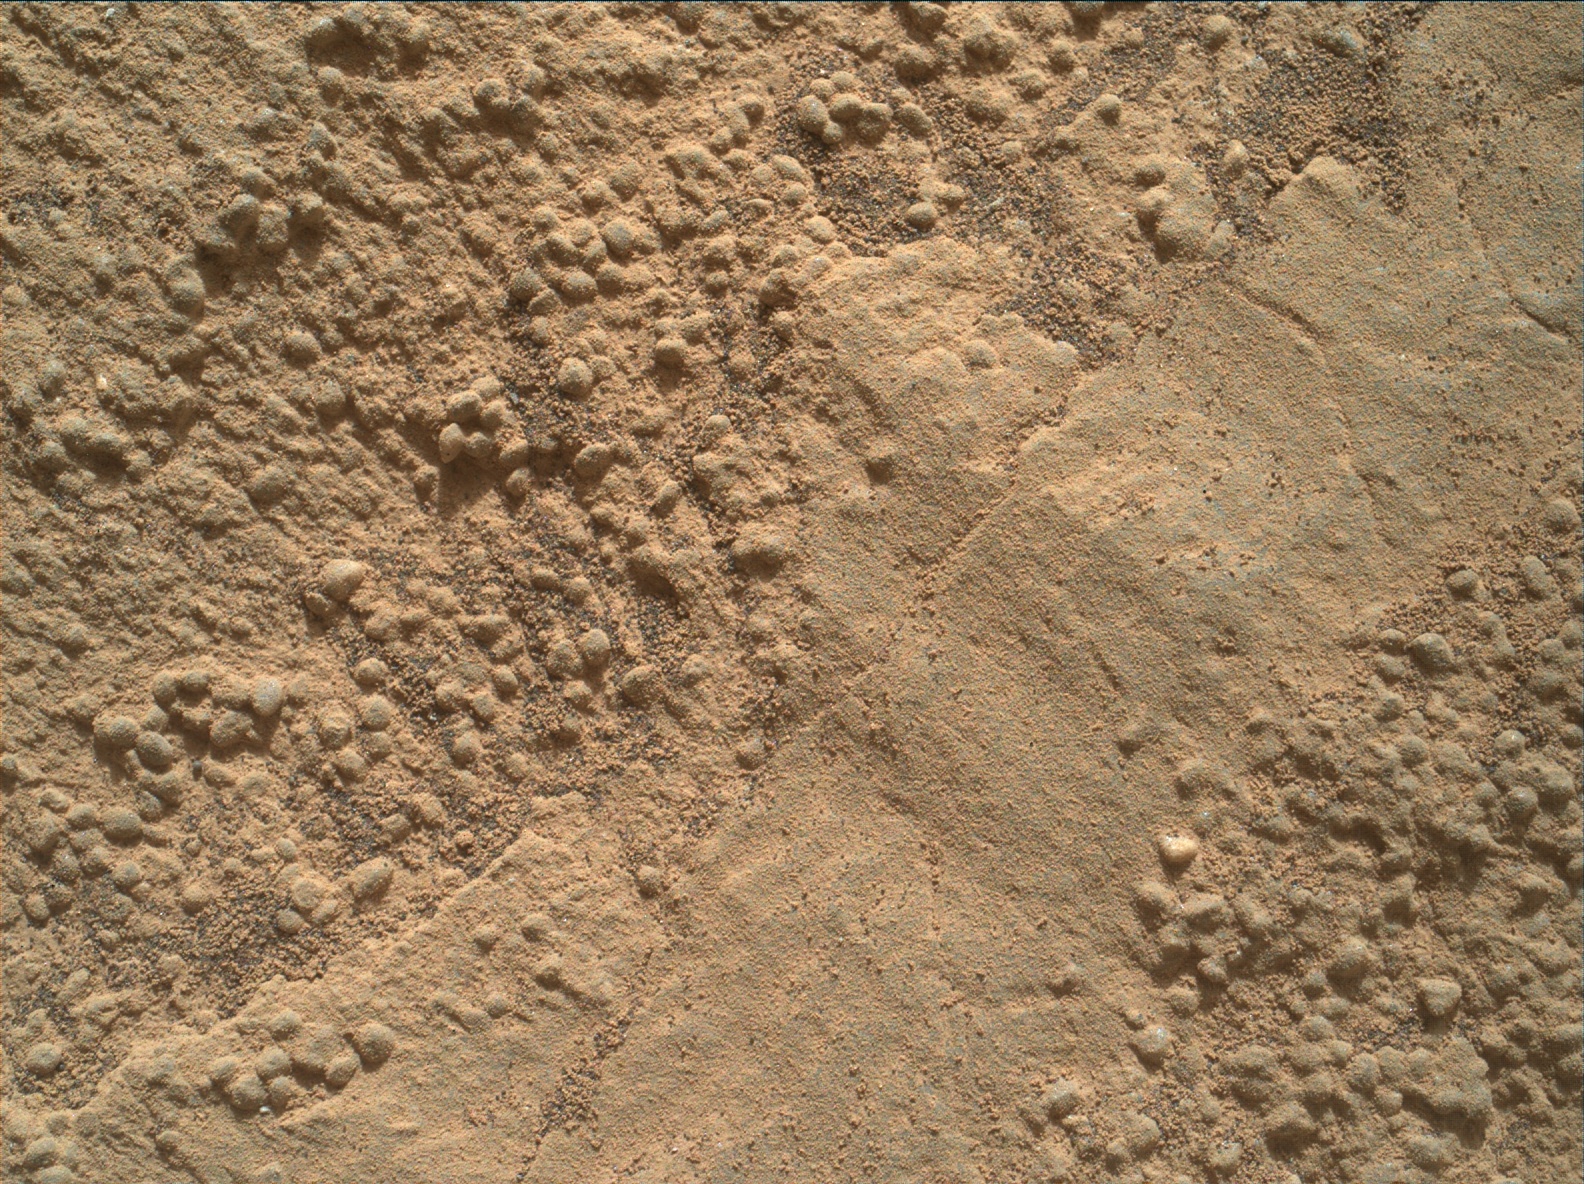 Nasa's Mars rover Curiosity acquired this image using its Mars Hand Lens Imager (MAHLI) on Sol 1343